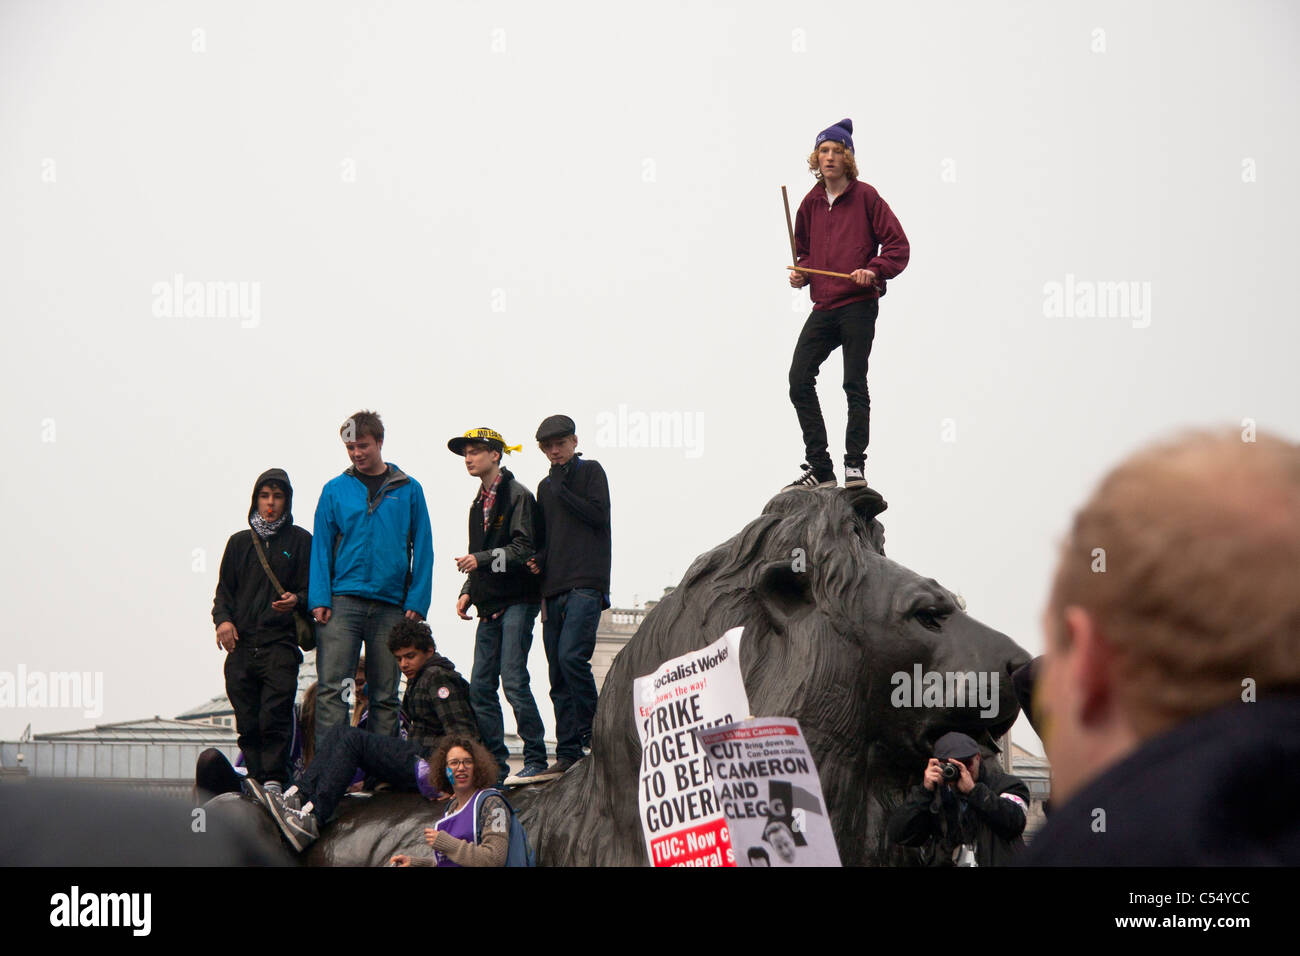 Demonstrators against cuts on top of a lion in Trafalgar Square. Stock Photo